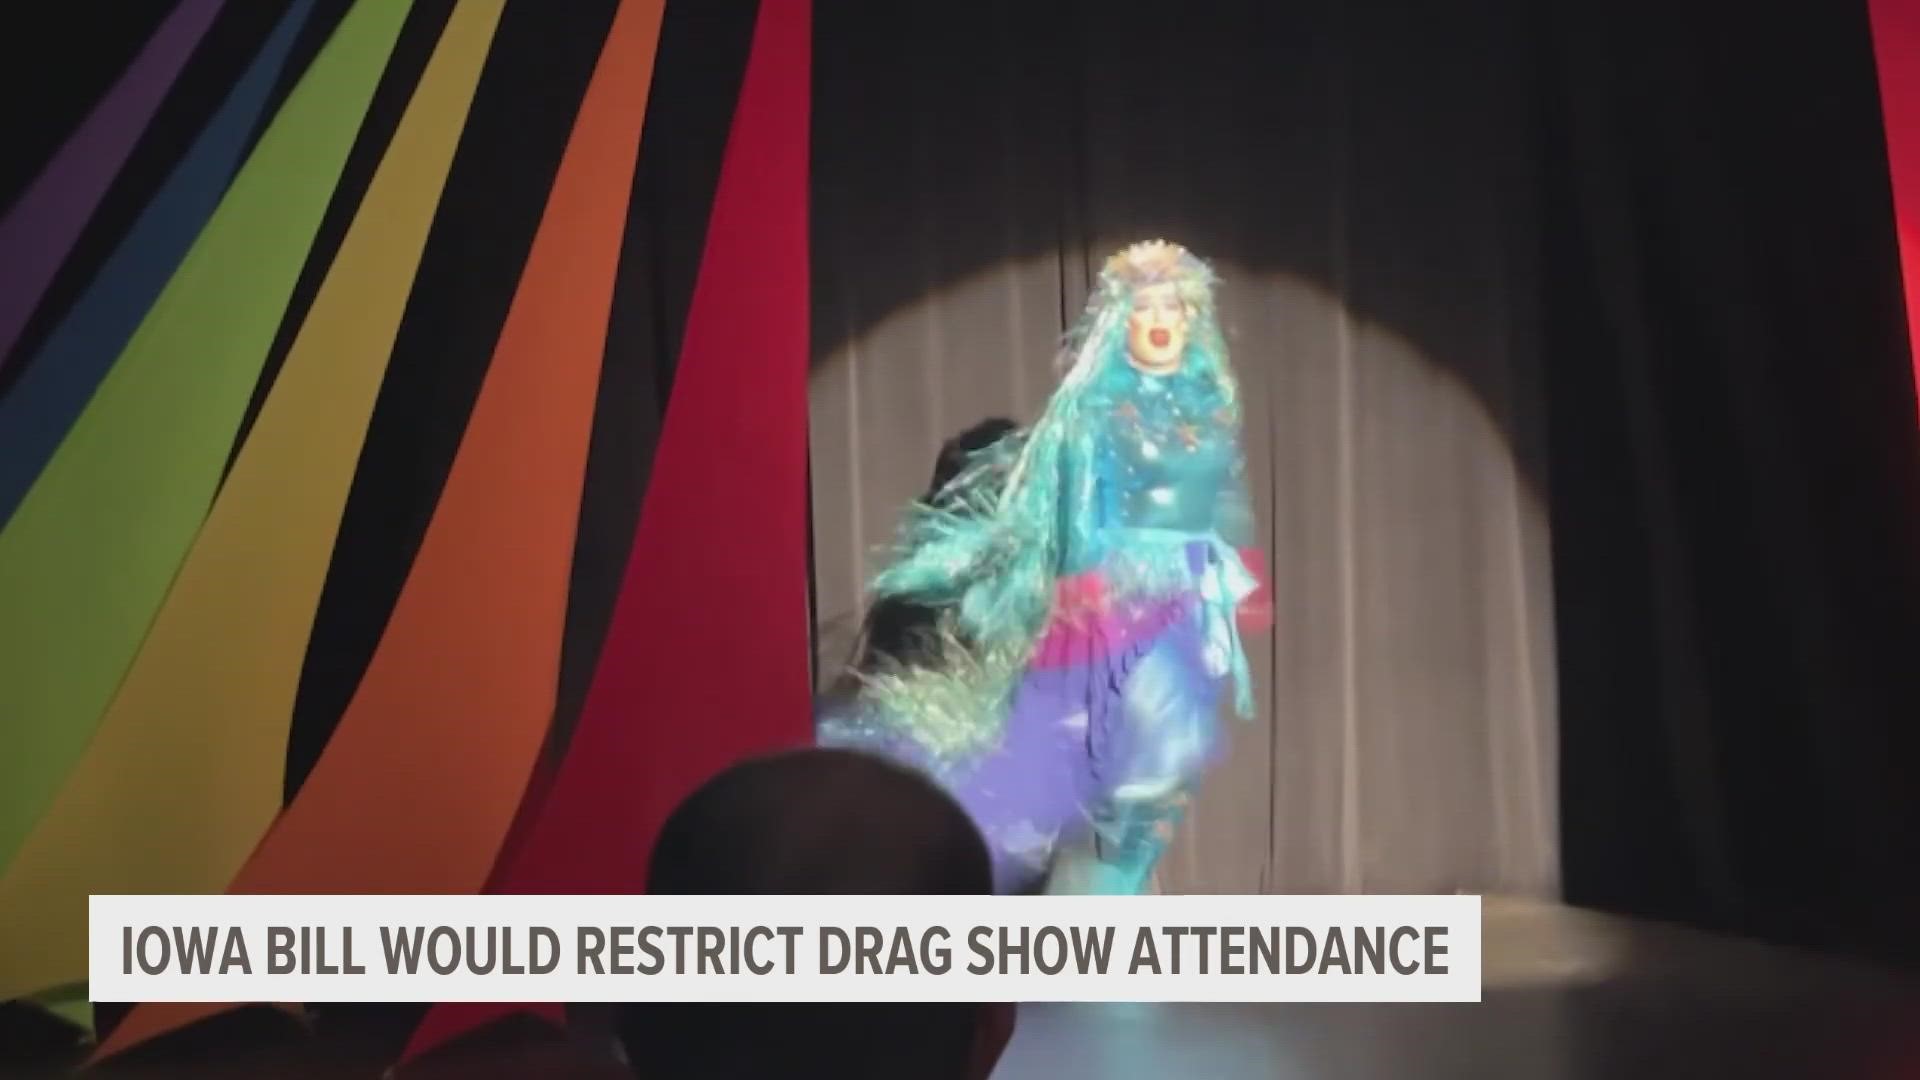 Critics argue the bill's definition of "drag show" is too broad.